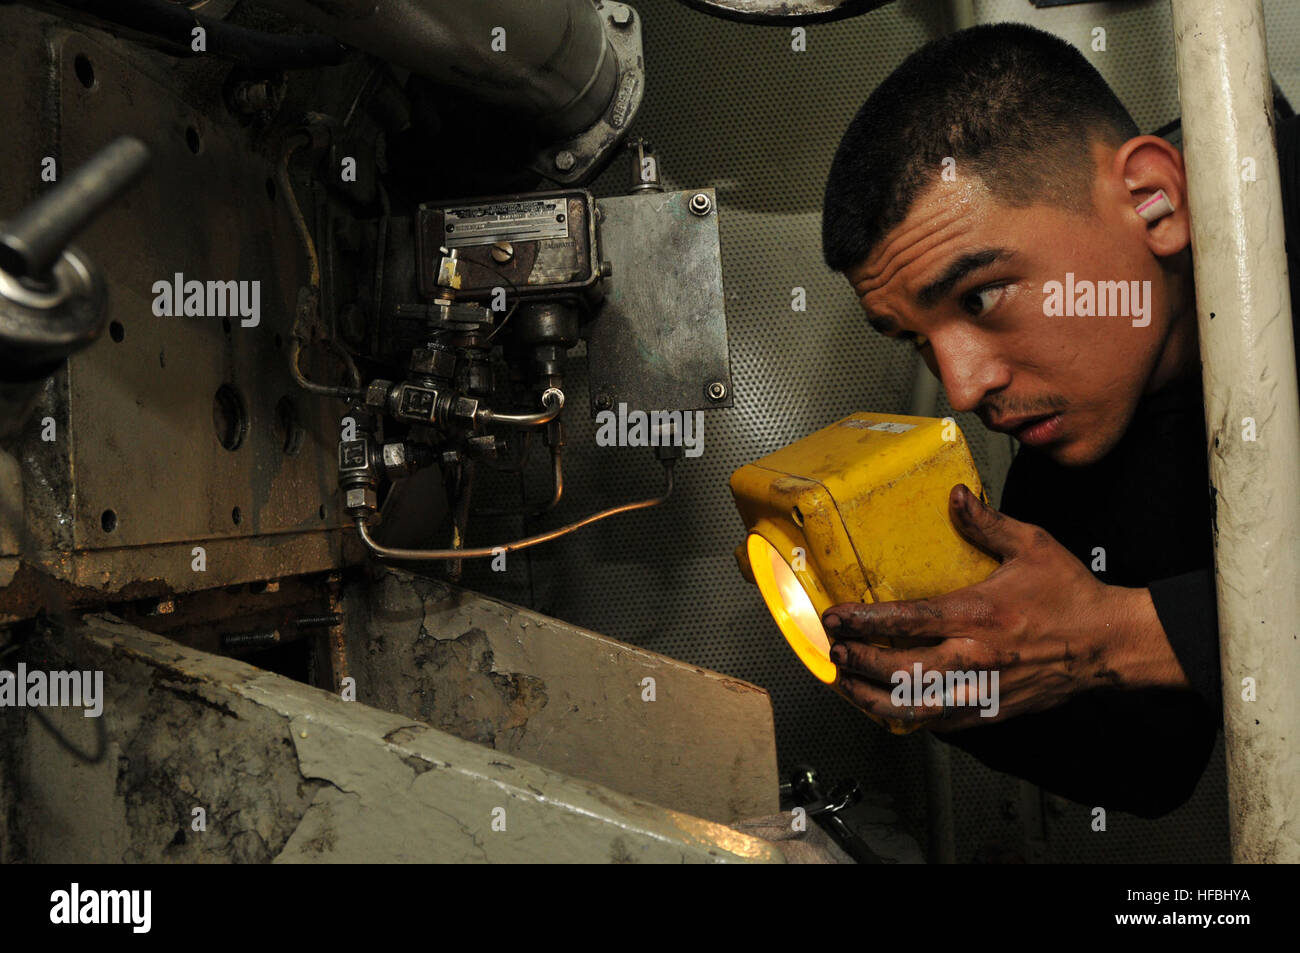 110406-N-NL541-091 CARIBBEAN SEA (April 6, 2011) Engineman 2nd Class Justin Davila, assigned to the guided-missile frigate USS Boone (FFG 28), uses a flashlight to inspect a service diesel generator. Boone is deployed in support of Southern Seas 2011. (U.S. Navy photo by Mass Communication Specialist 3rd Class Stuart Phillips/Released)  - Official U.S. Navy Imagery - Enginemen 2nd Class, Justin Davila inspects service diesel aboard the USS Boone Stock Photo